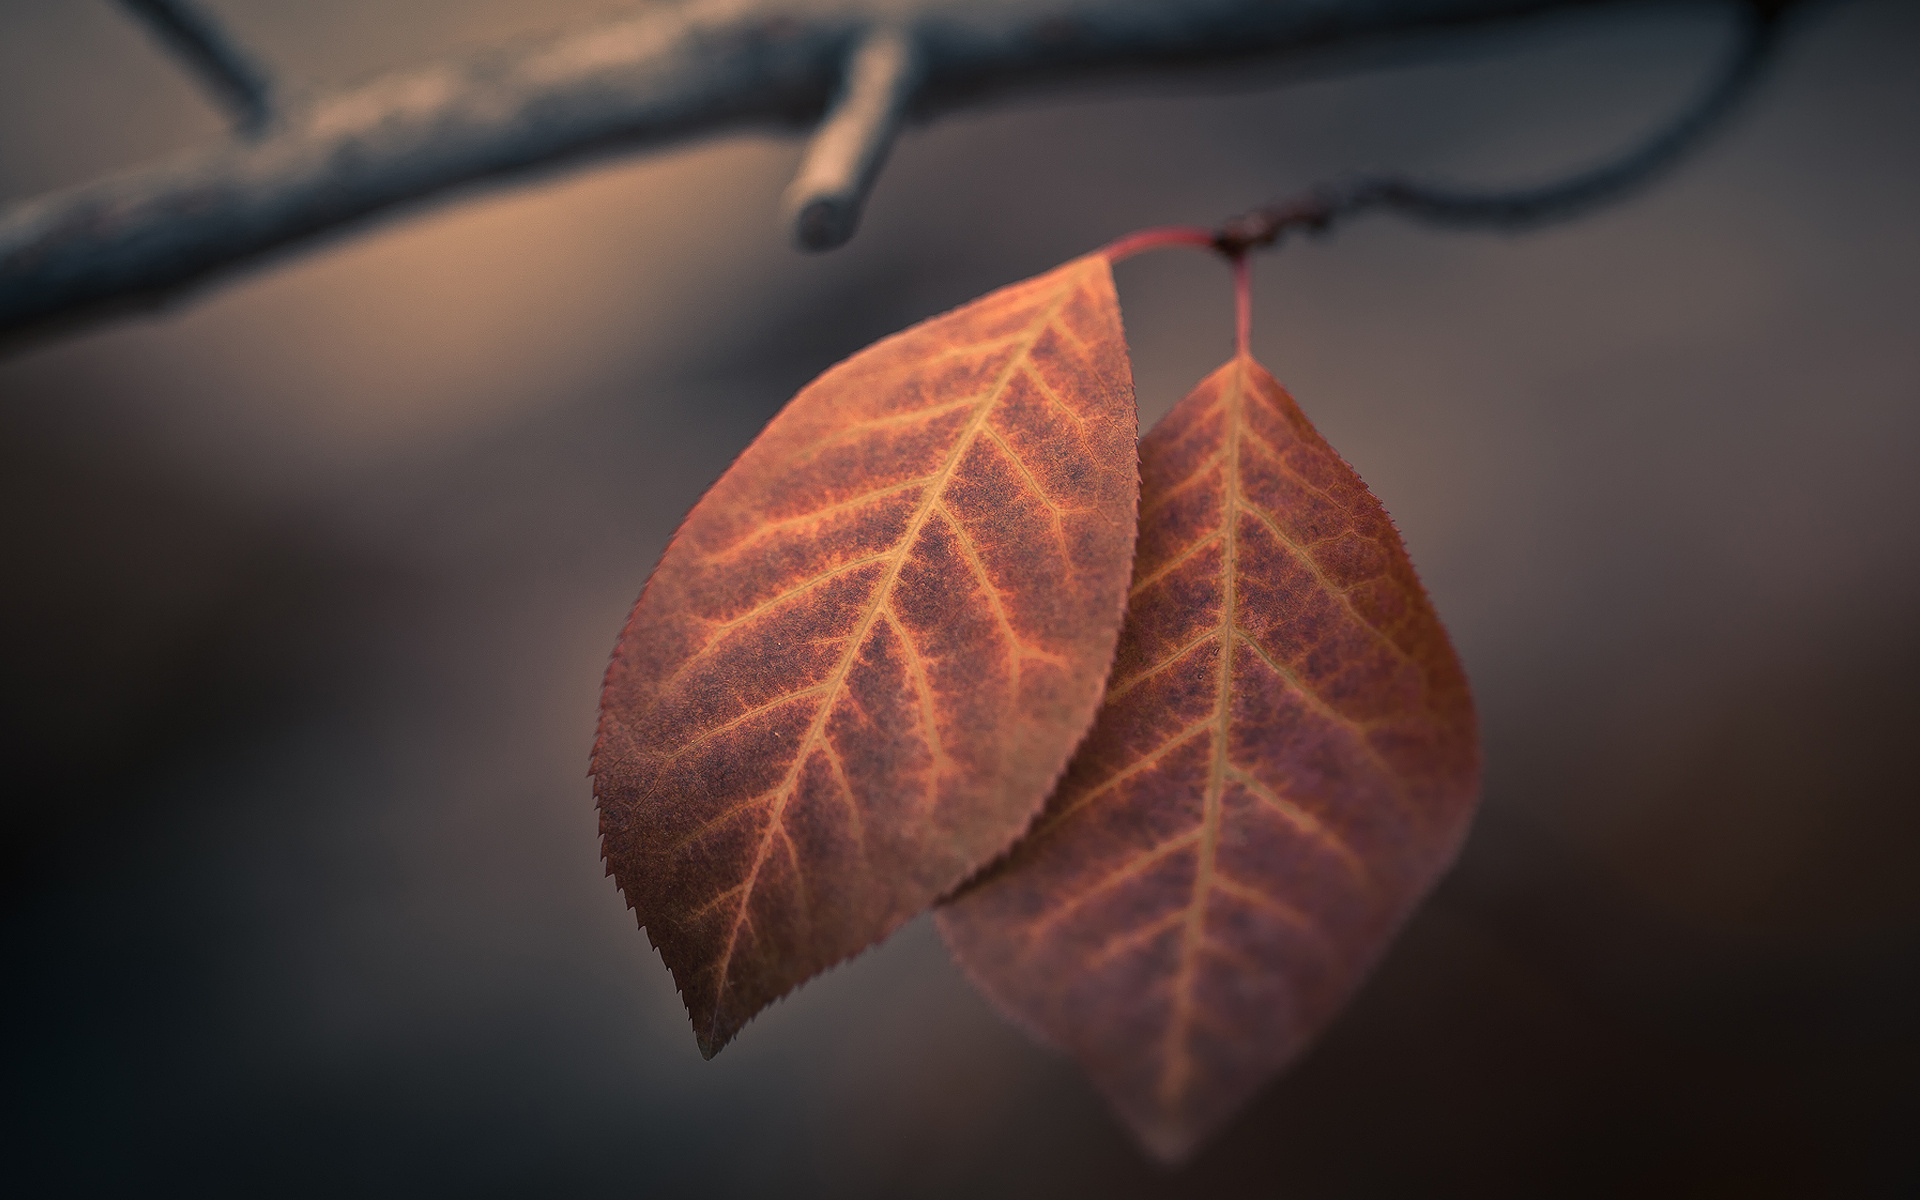 Wallpapers withered leaf branch of a tree nature on the desktop